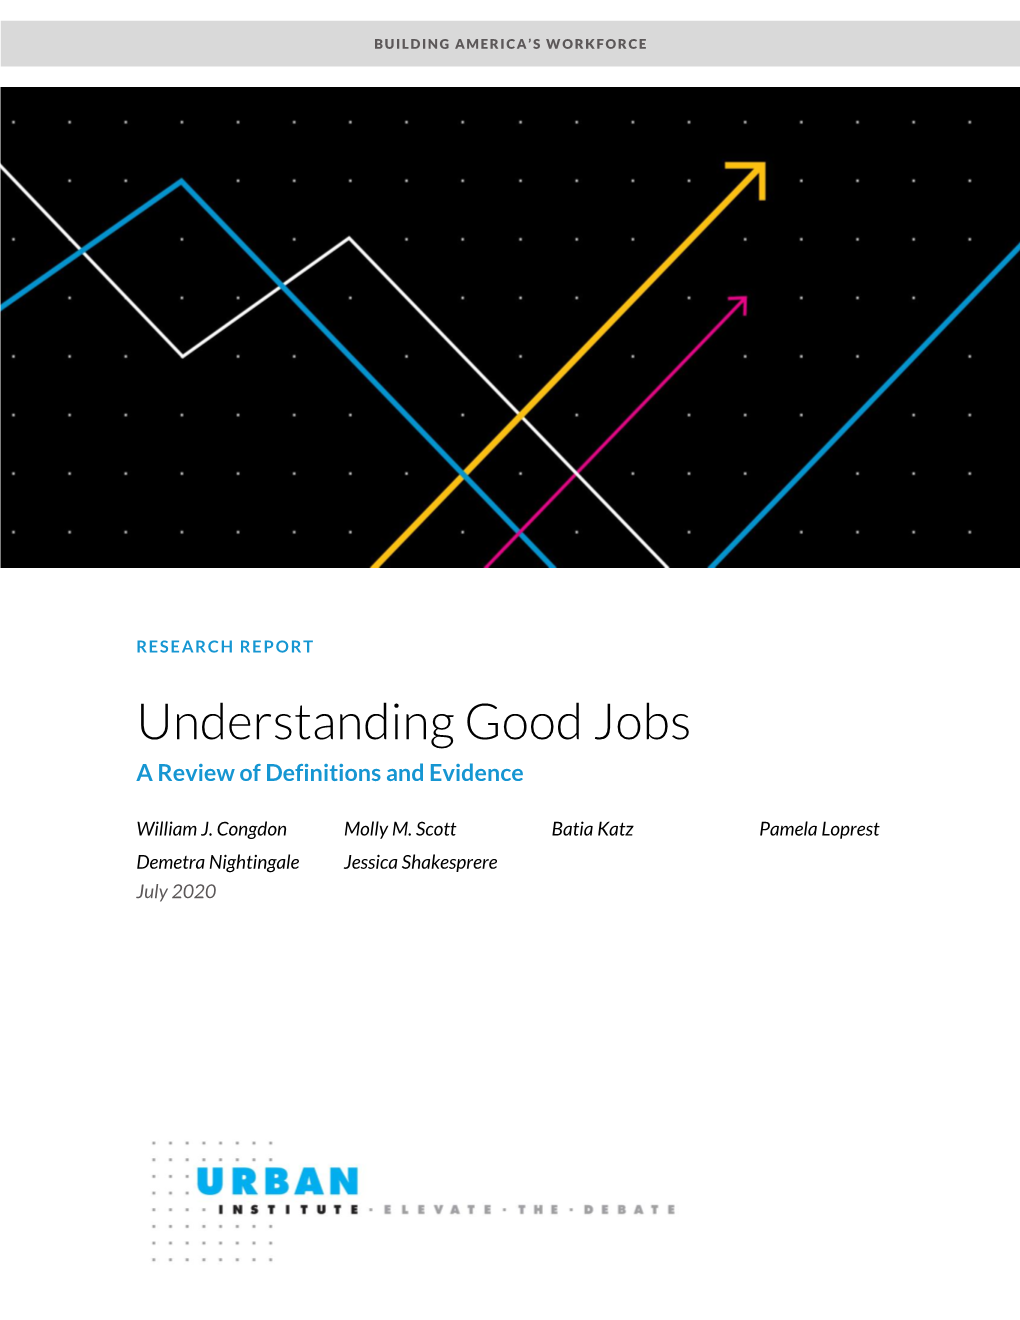 Understanding Good Jobs a Review of Definitions and Evidence